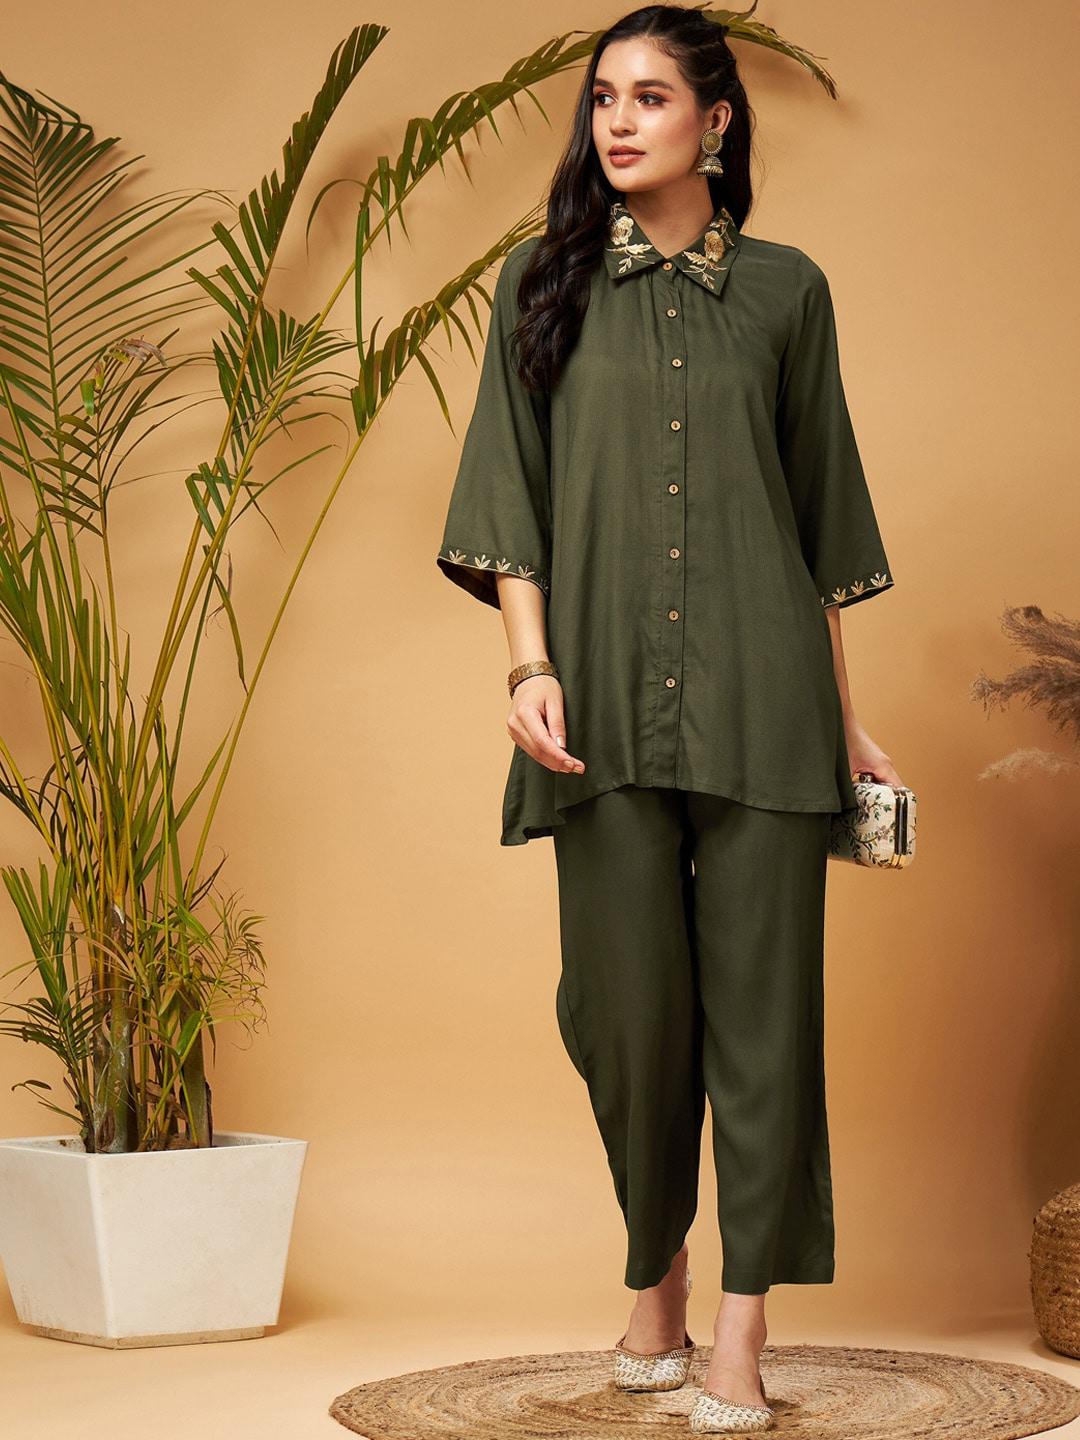 Shae by SASSAFRAS Zari Embroidered Shirt Collar Tunic Top With Palazzos Co-Ords